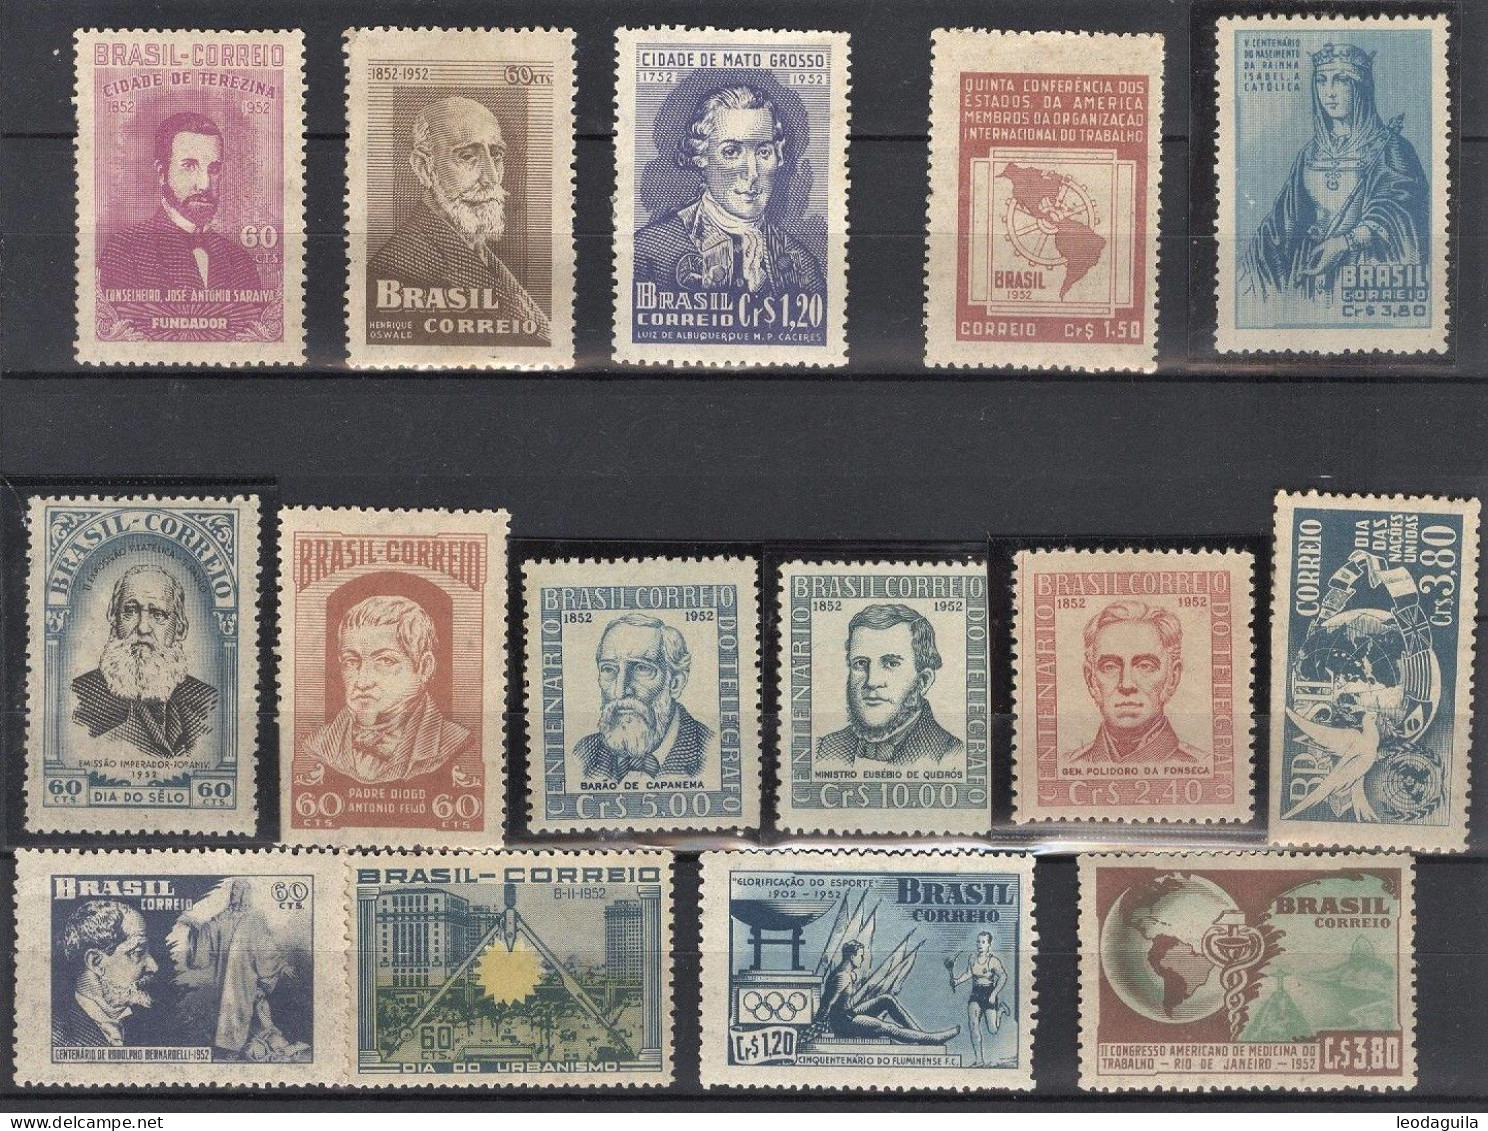 BRAZIL 1952   FULL YEAR COLLECTION  - 15 UNUSED COMMEMORATIVES STAMPS - Annate Complete